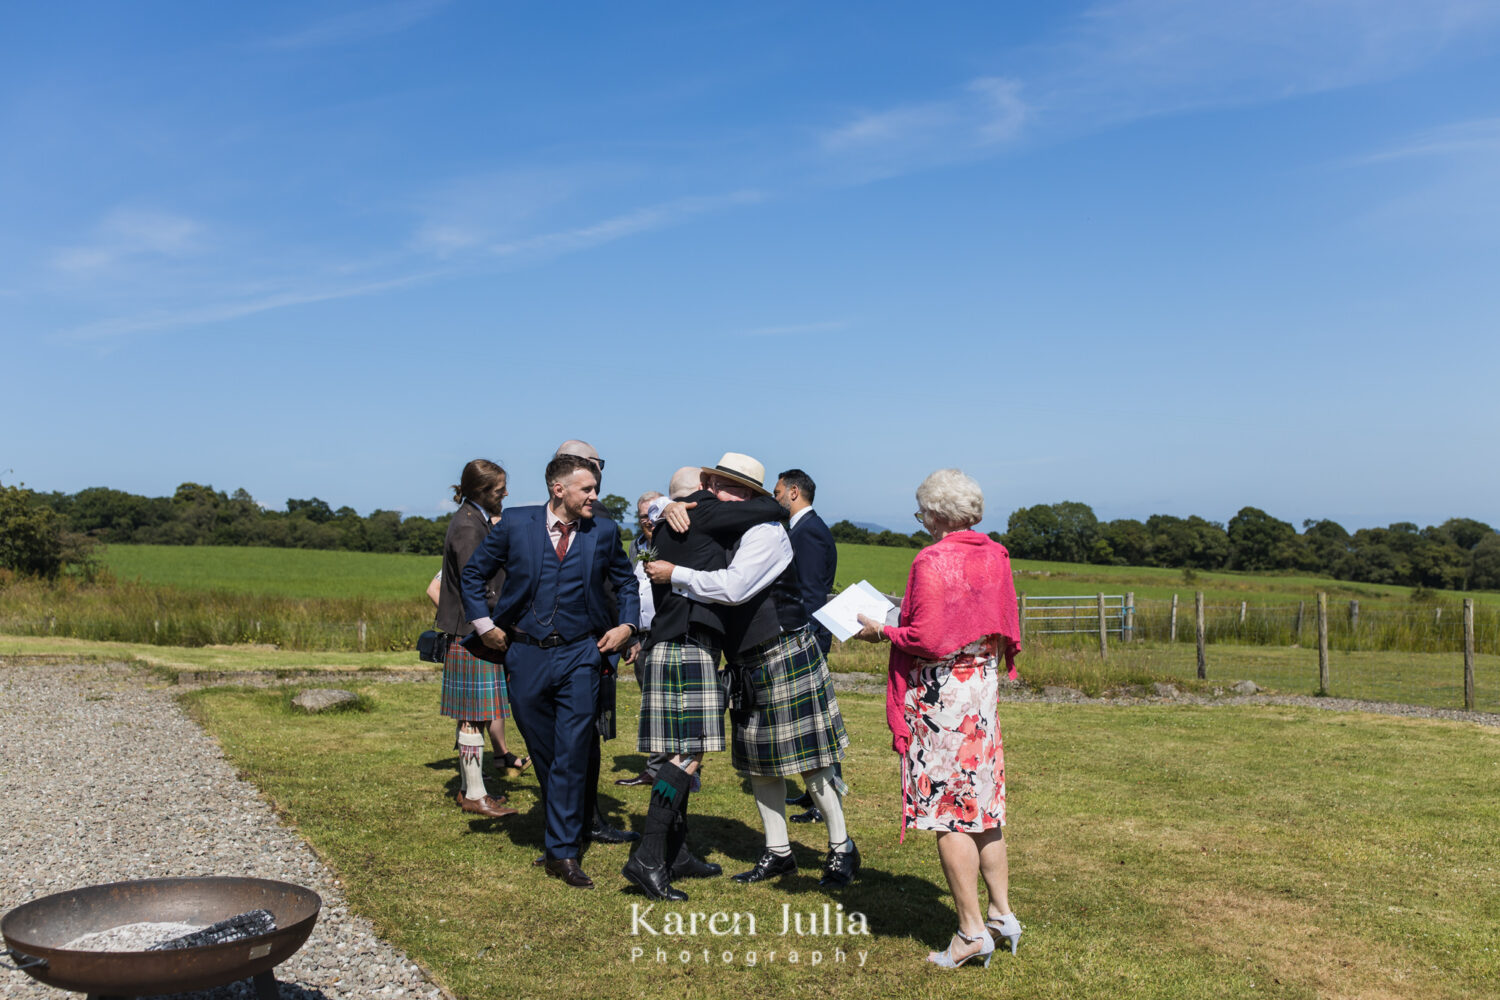 Wedding guests greet each other on the lawn at Fruin Farm